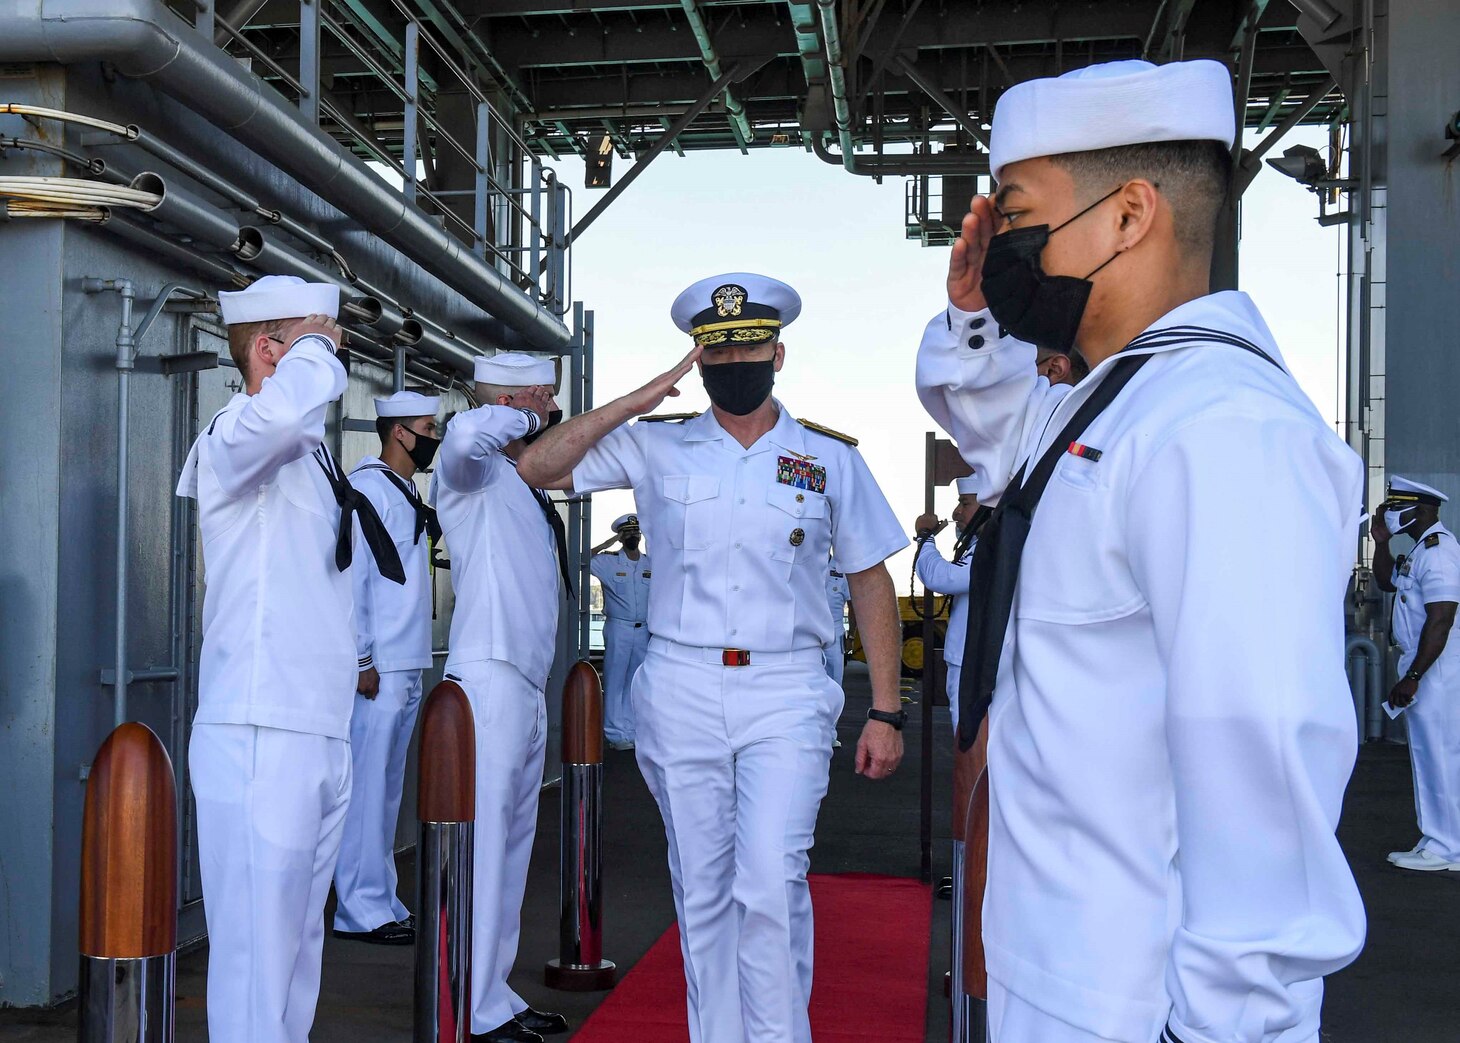 (July 8, 2021) Rear Admiral Ben Reynolds, Director of Maritime Headquarters, U.S. Naval Forces 6th Fleet, walks through the side boys after receiving a tour aboard the Expeditionary Sea Base USS Hershel “Woody” Williams (ESB 4) in the Atlantic Ocean, July 8, 2021. Hershel “Woody” Williams is on a scheduled deployment in the U.S. Sixth Fleet area of operations in support of U.S. national interests and security in Europe and Africa.